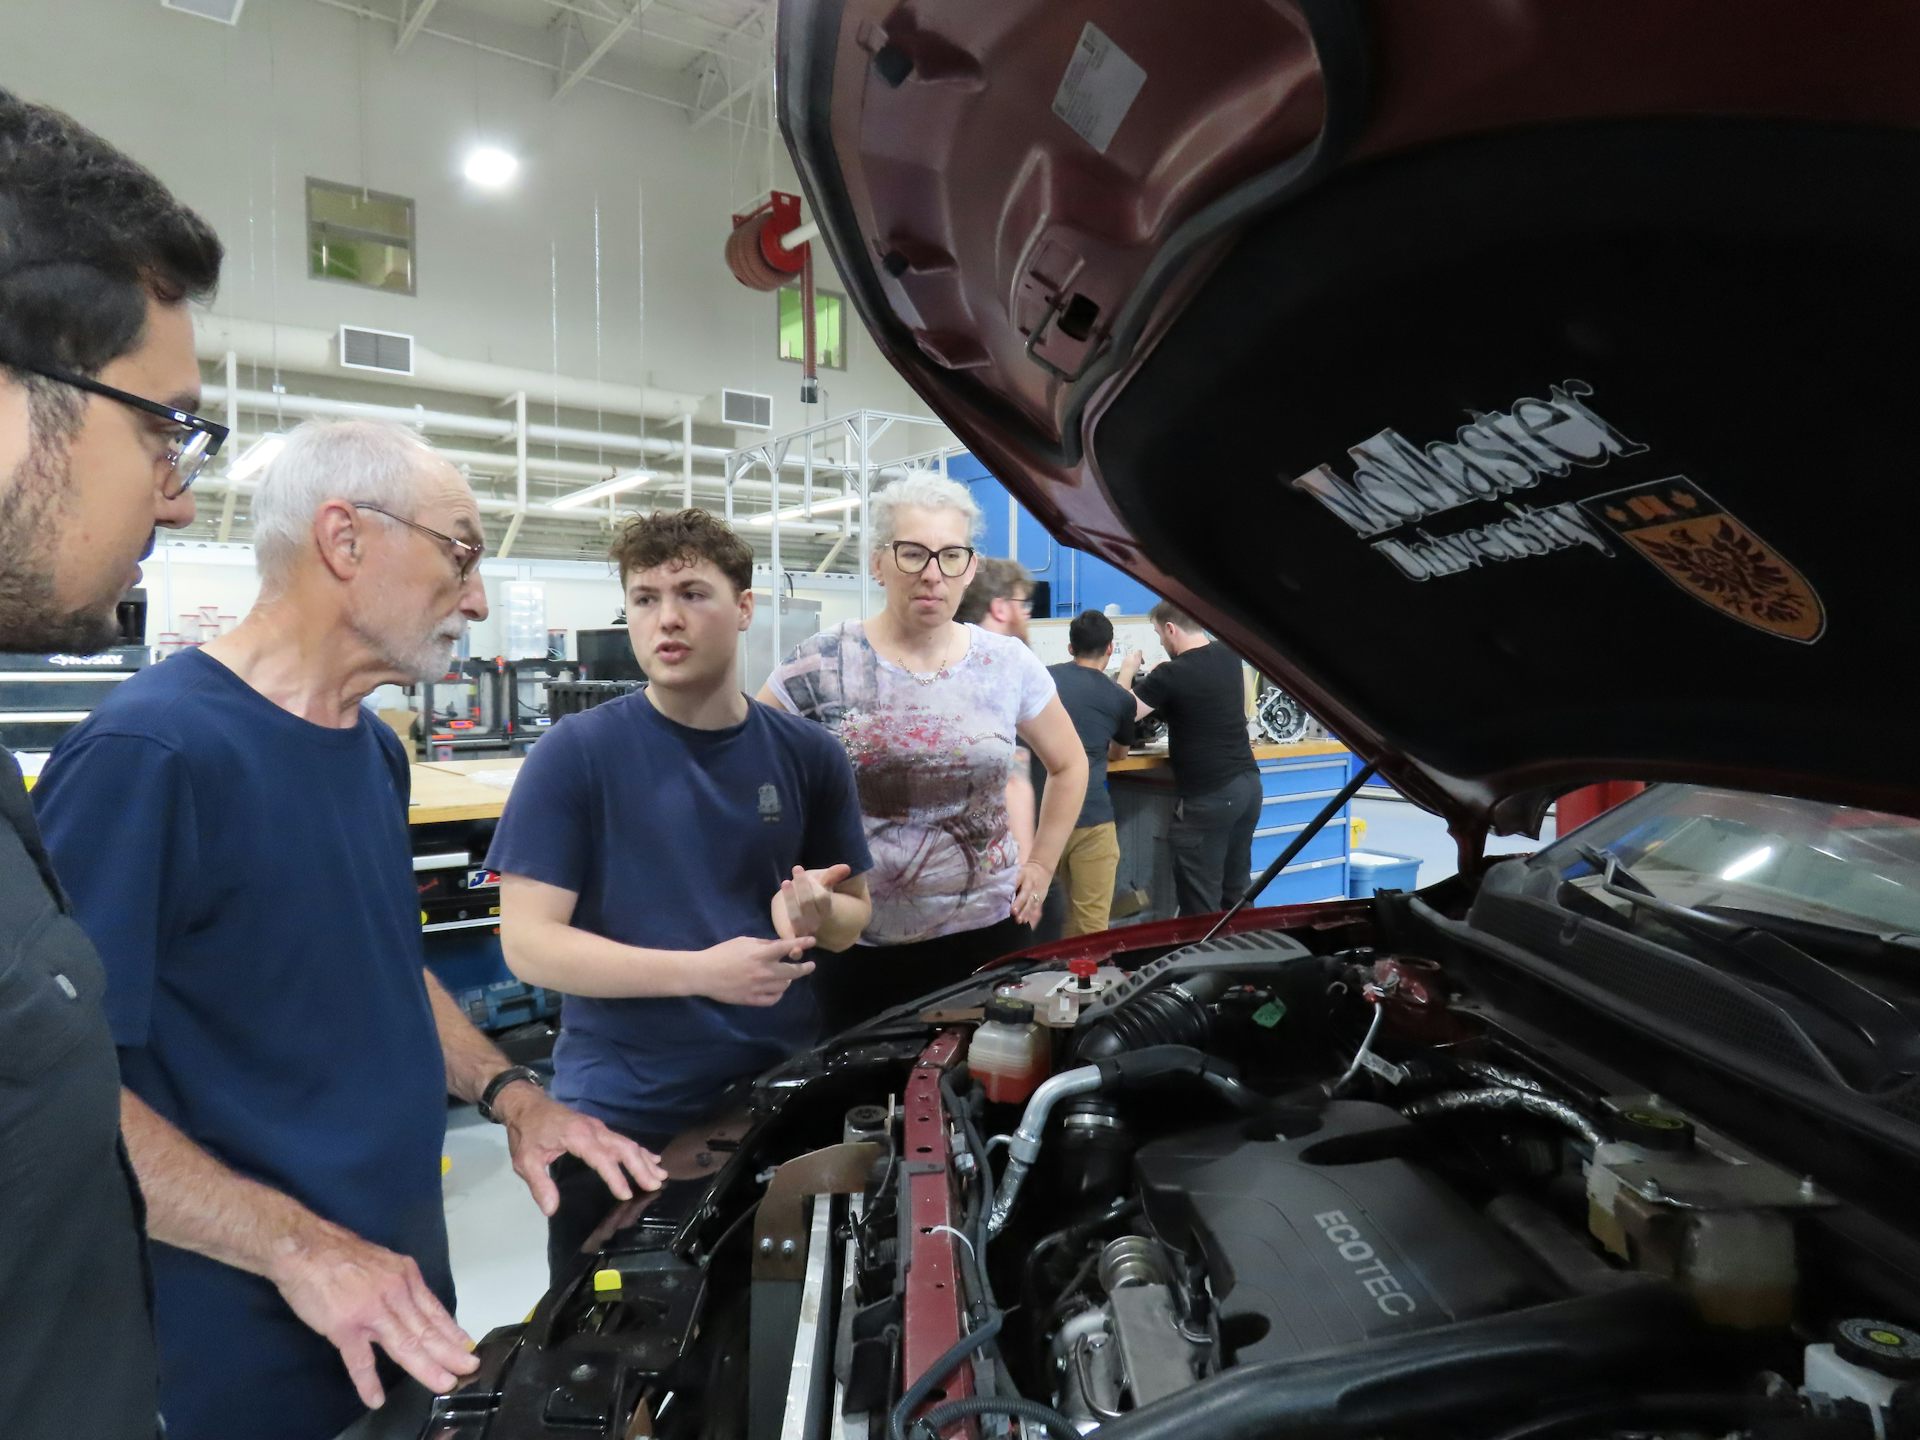 An older adult, researcher Brenda Vrjklan and two students look under the hood of a car in a lab or workshop